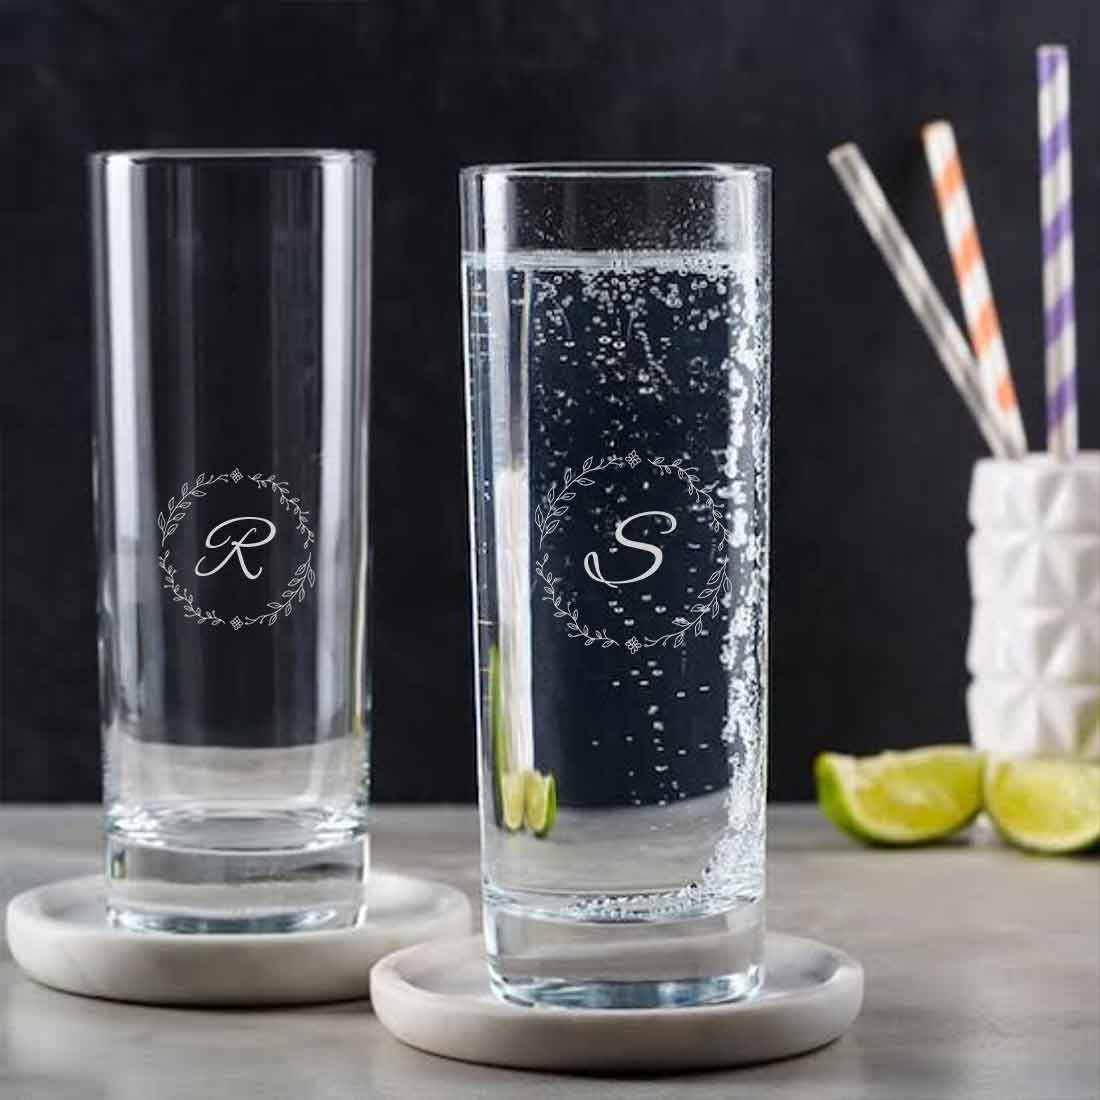 Personalized Mojito Glassware Engraved with Initial